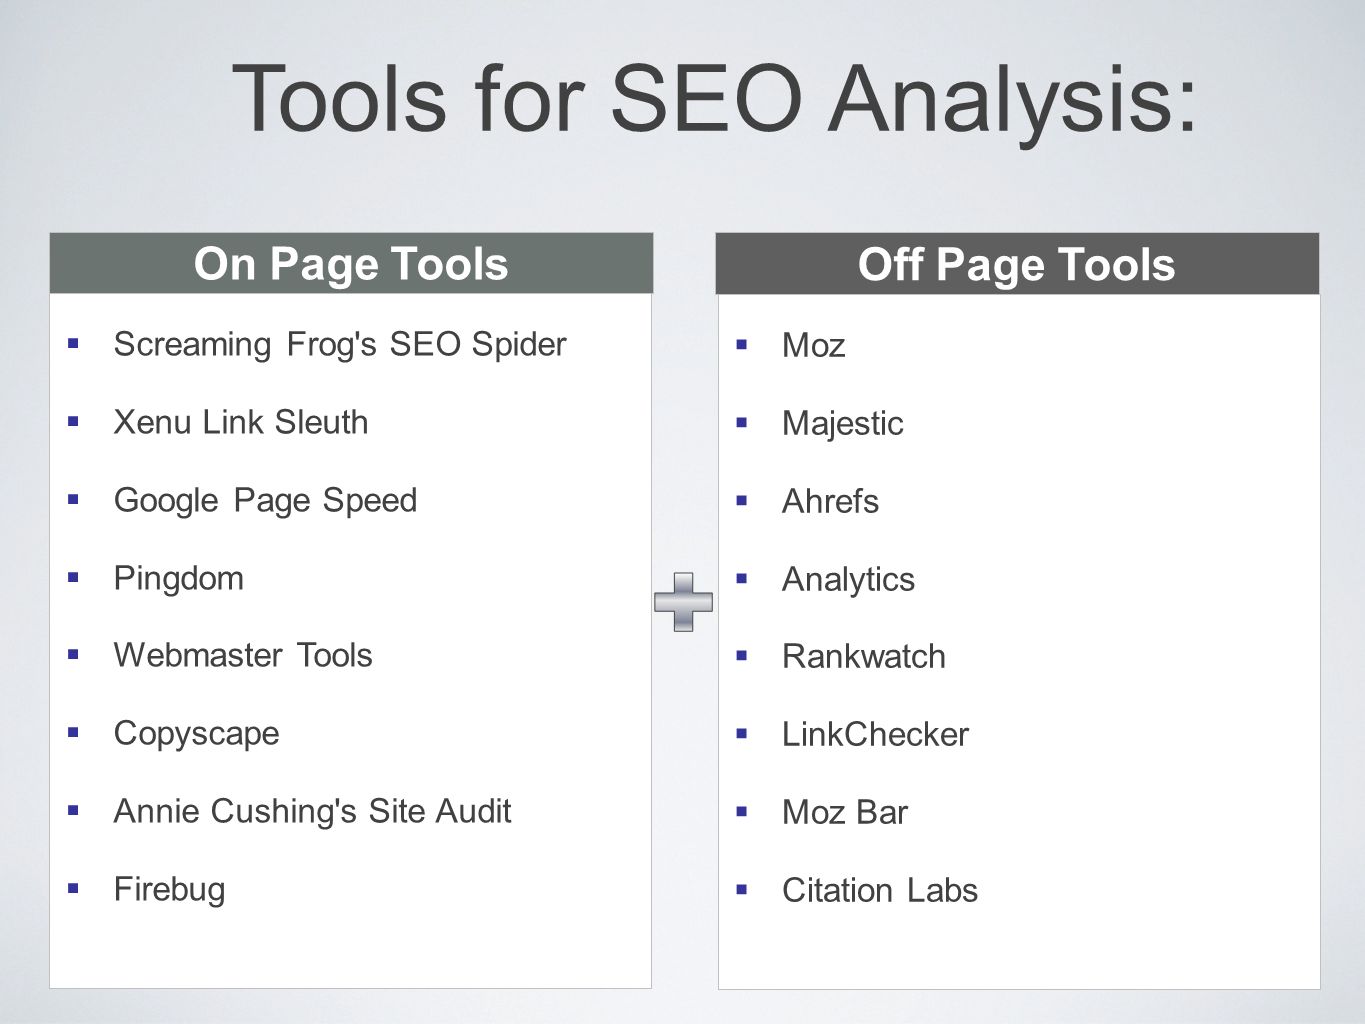 Tools for SEO Analysis: On Page Tools Off Page Tools  Screaming Frog s SEO Spider  Xenu Link Sleuth  Google Page Speed  Pingdom  Webmaster Tools  Copyscape  Annie Cushing s Site Audit  Firebug  Moz  Majestic  Ahrefs  Analytics  Rankwatch  LinkChecker  Moz Bar  Citation Labs